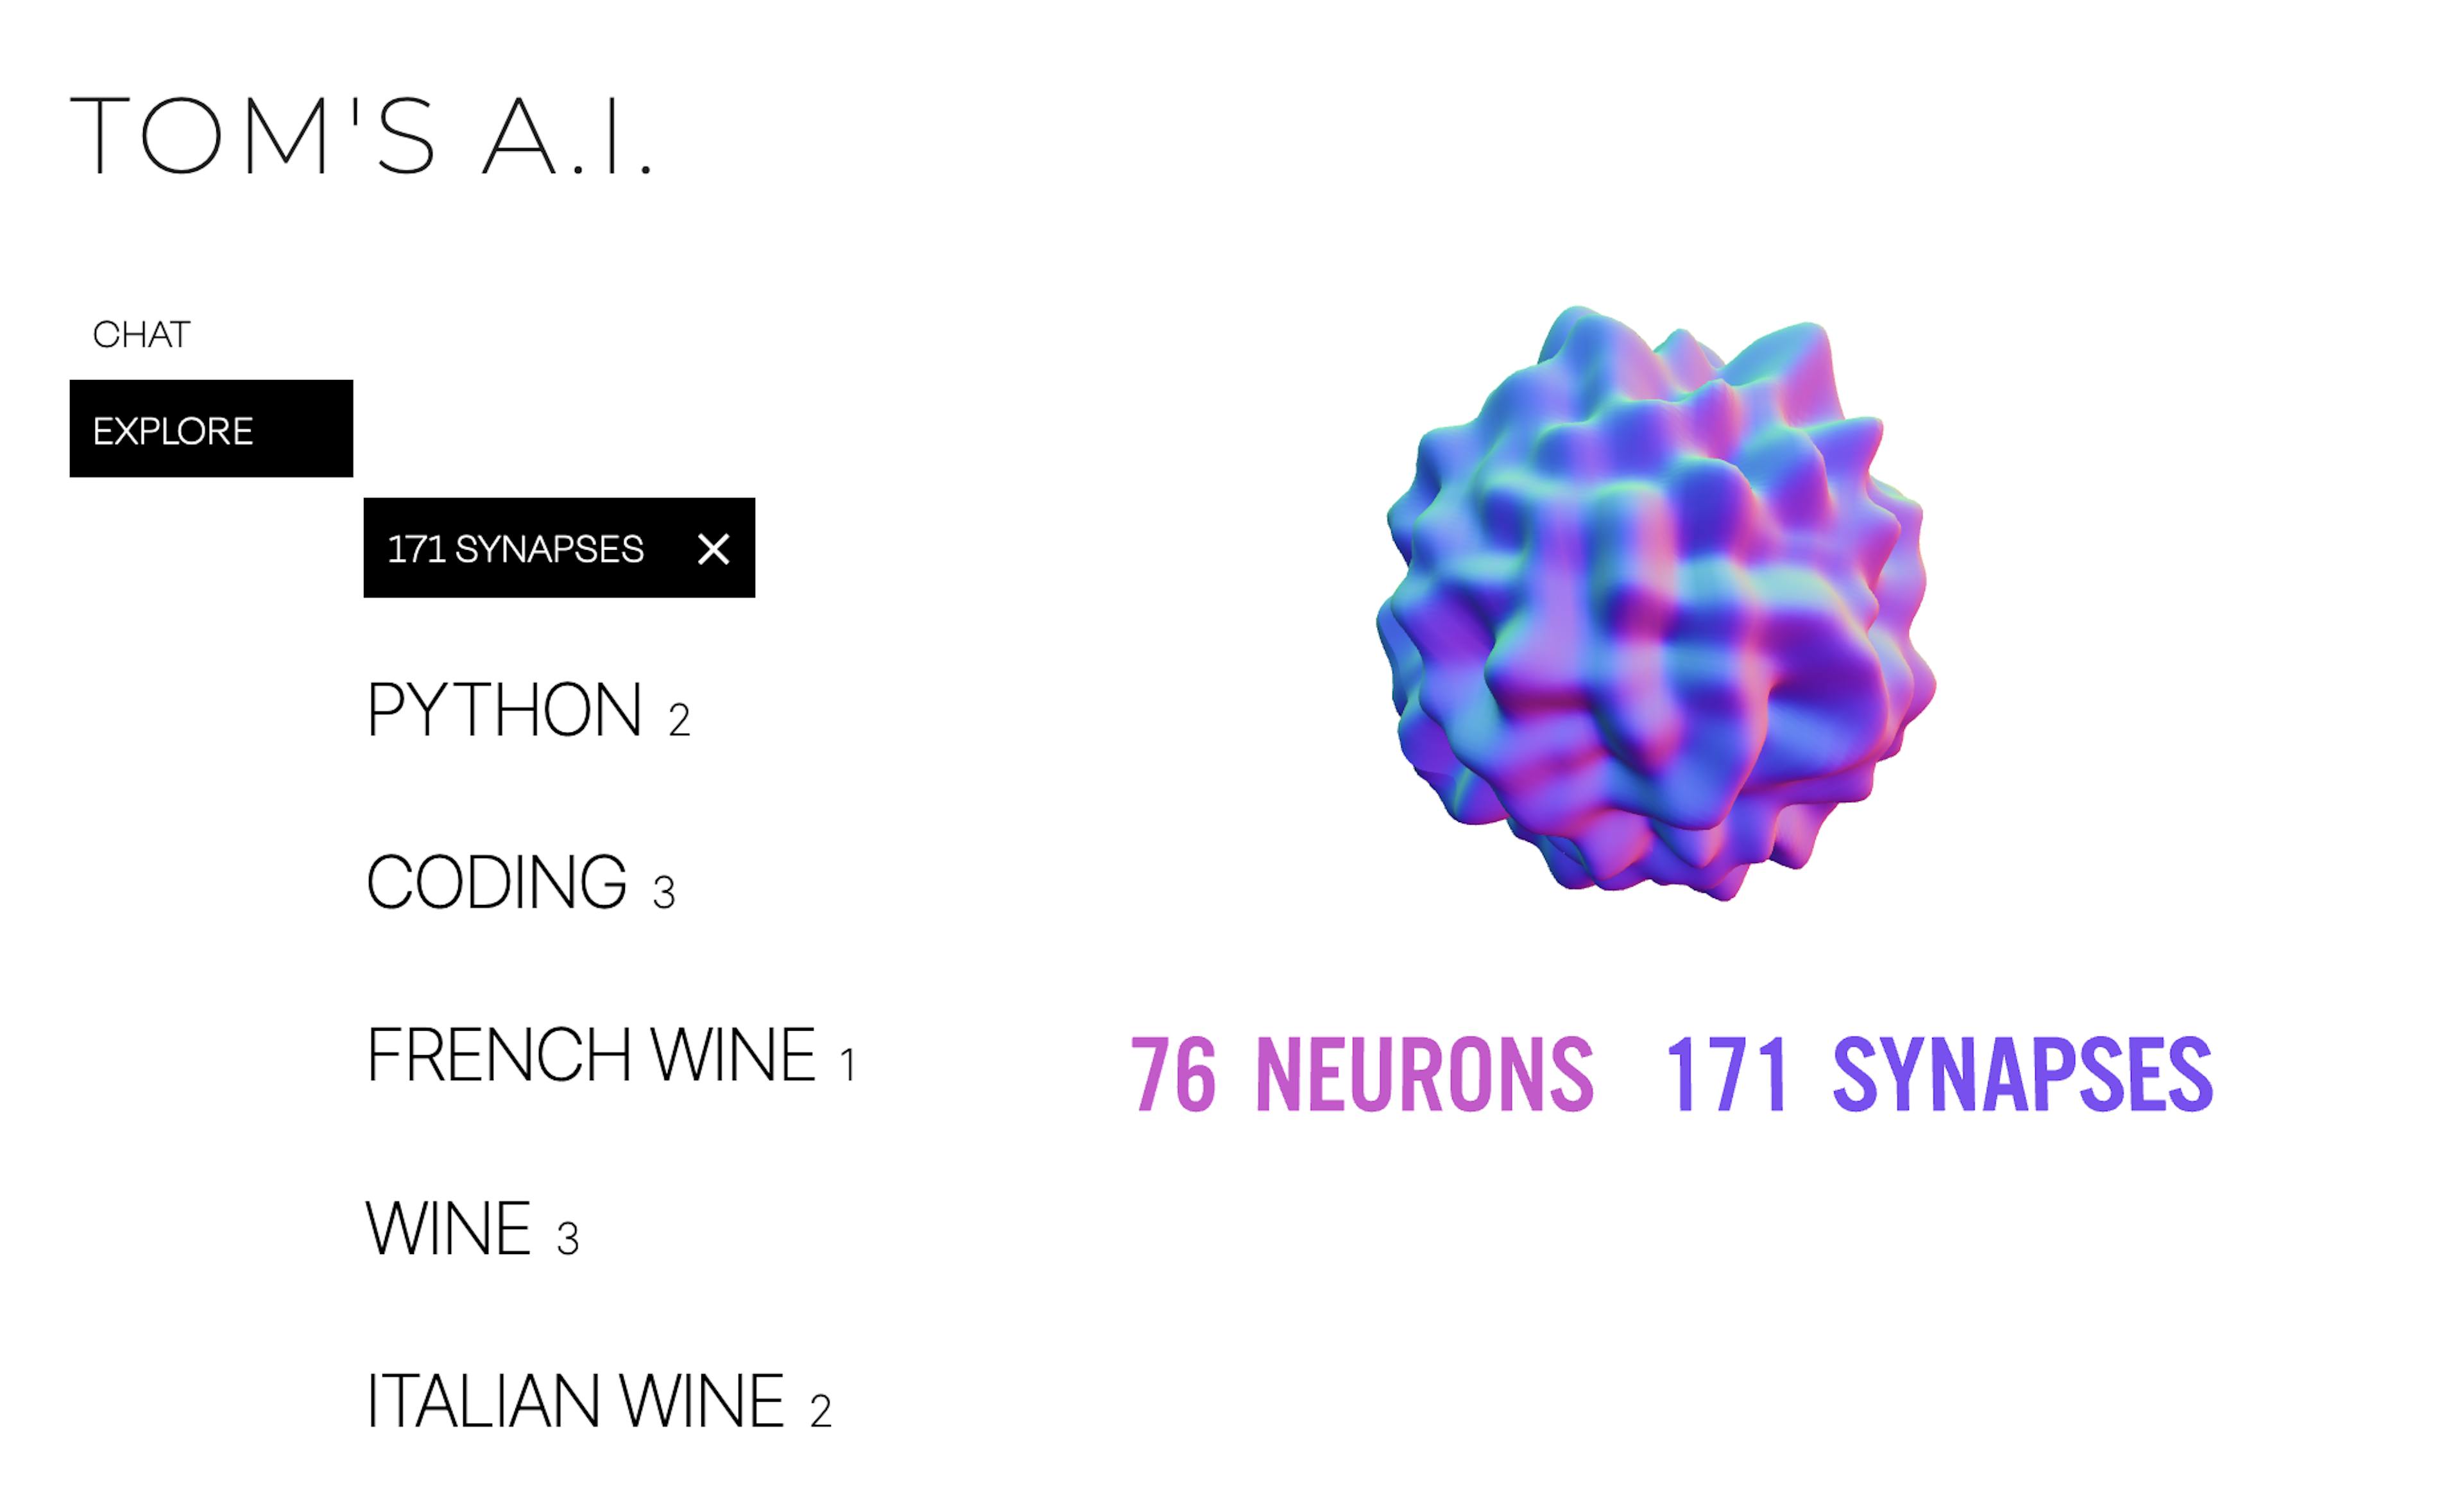 I find it hilarious that my AI knows about my wine preferences